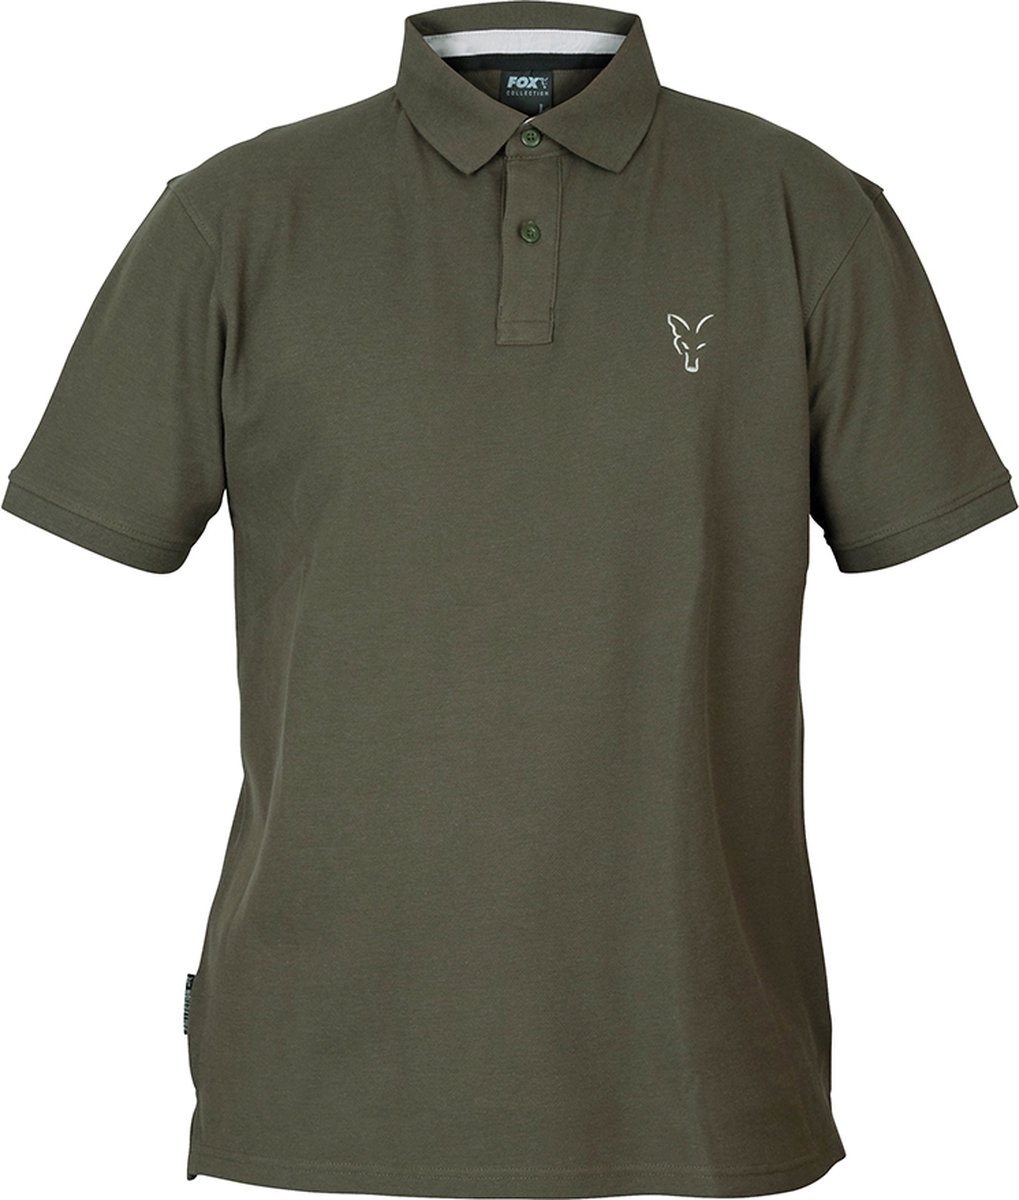 Fox Collection Green/Silver - Polo Shirt - Maat L - Zilver